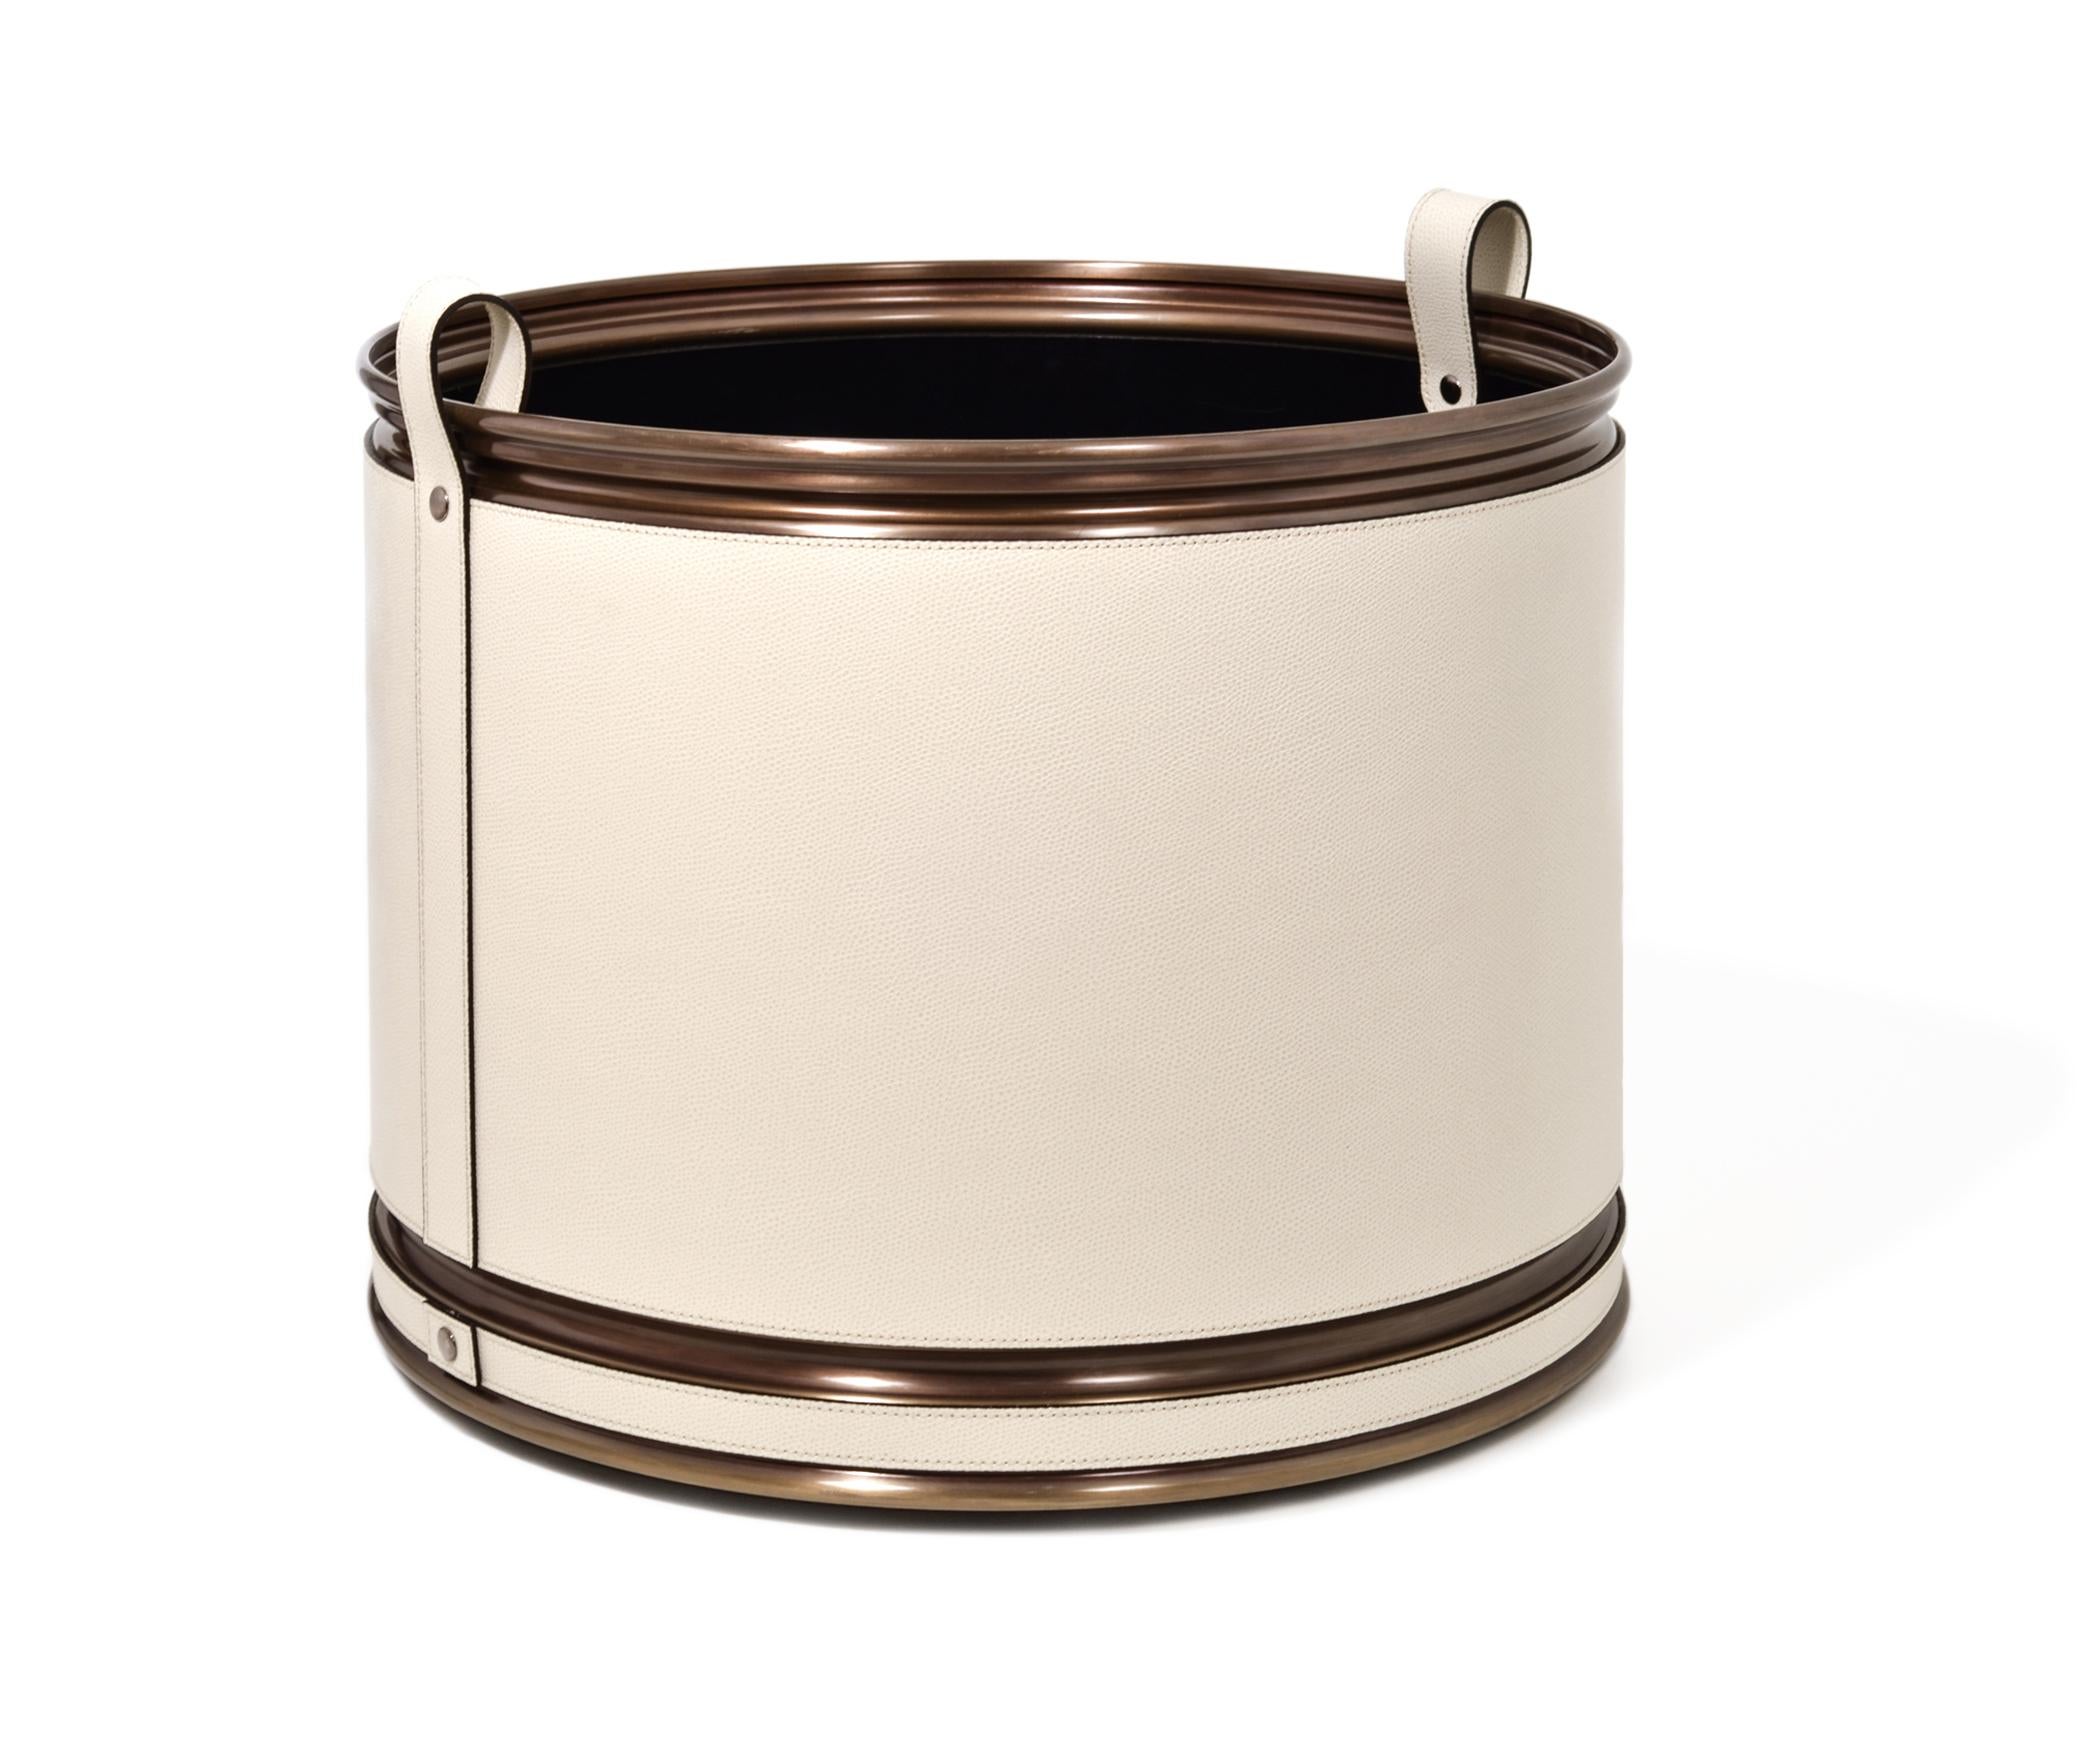 A royal allure for this gorgeous Cachepot.

A perfect balance between leather and brass, where the bright nuance of the leather harmonizes with the cachepot's edges. The two handles and the wheels to be easily moved around are the perfect final